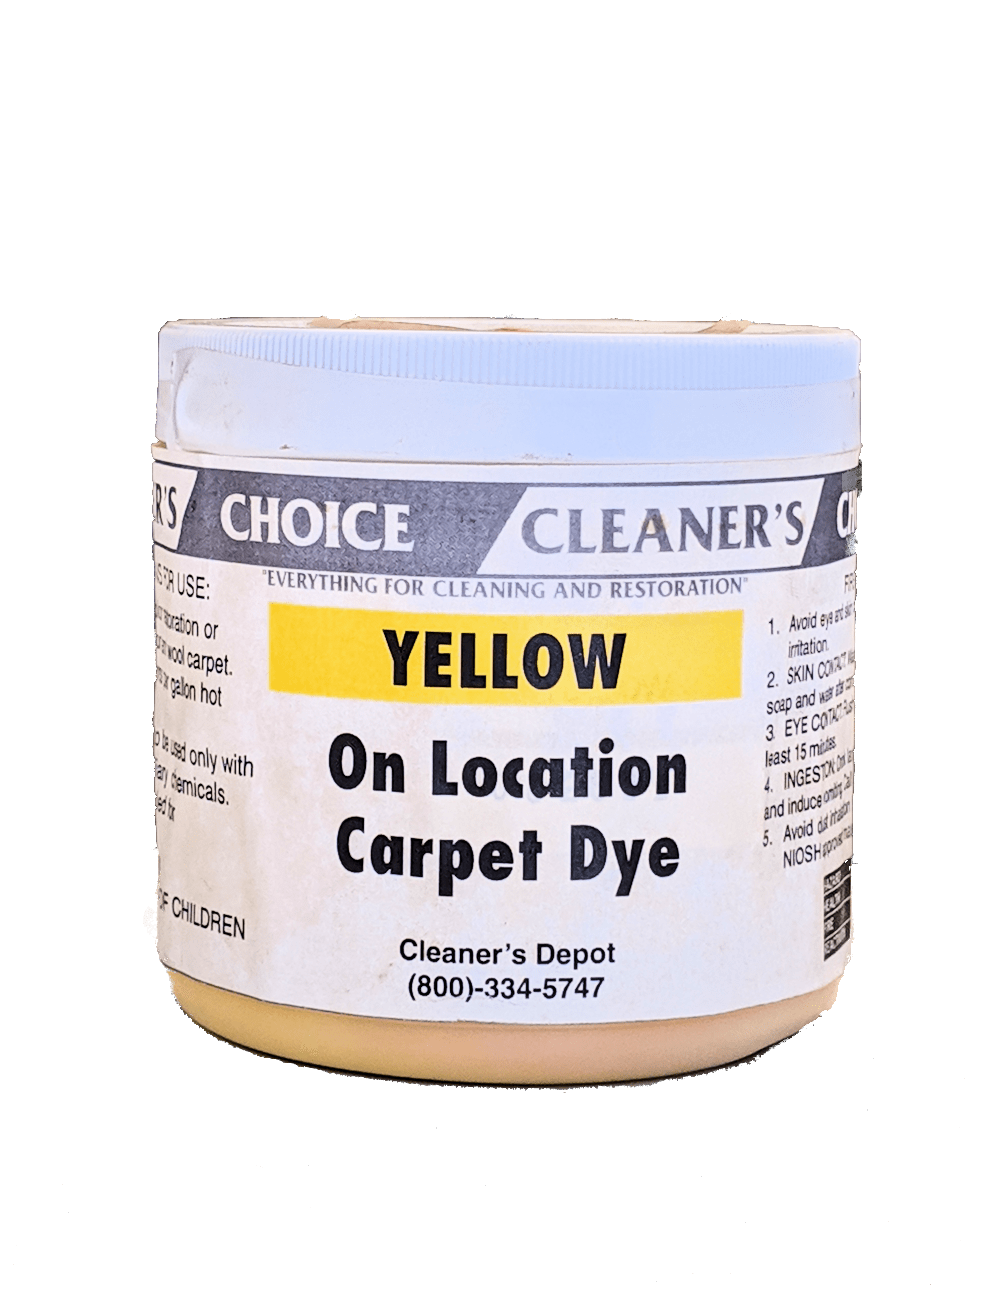 YELLOW CARPET DYE - Cleaner's Depot - Cleaner's Choice